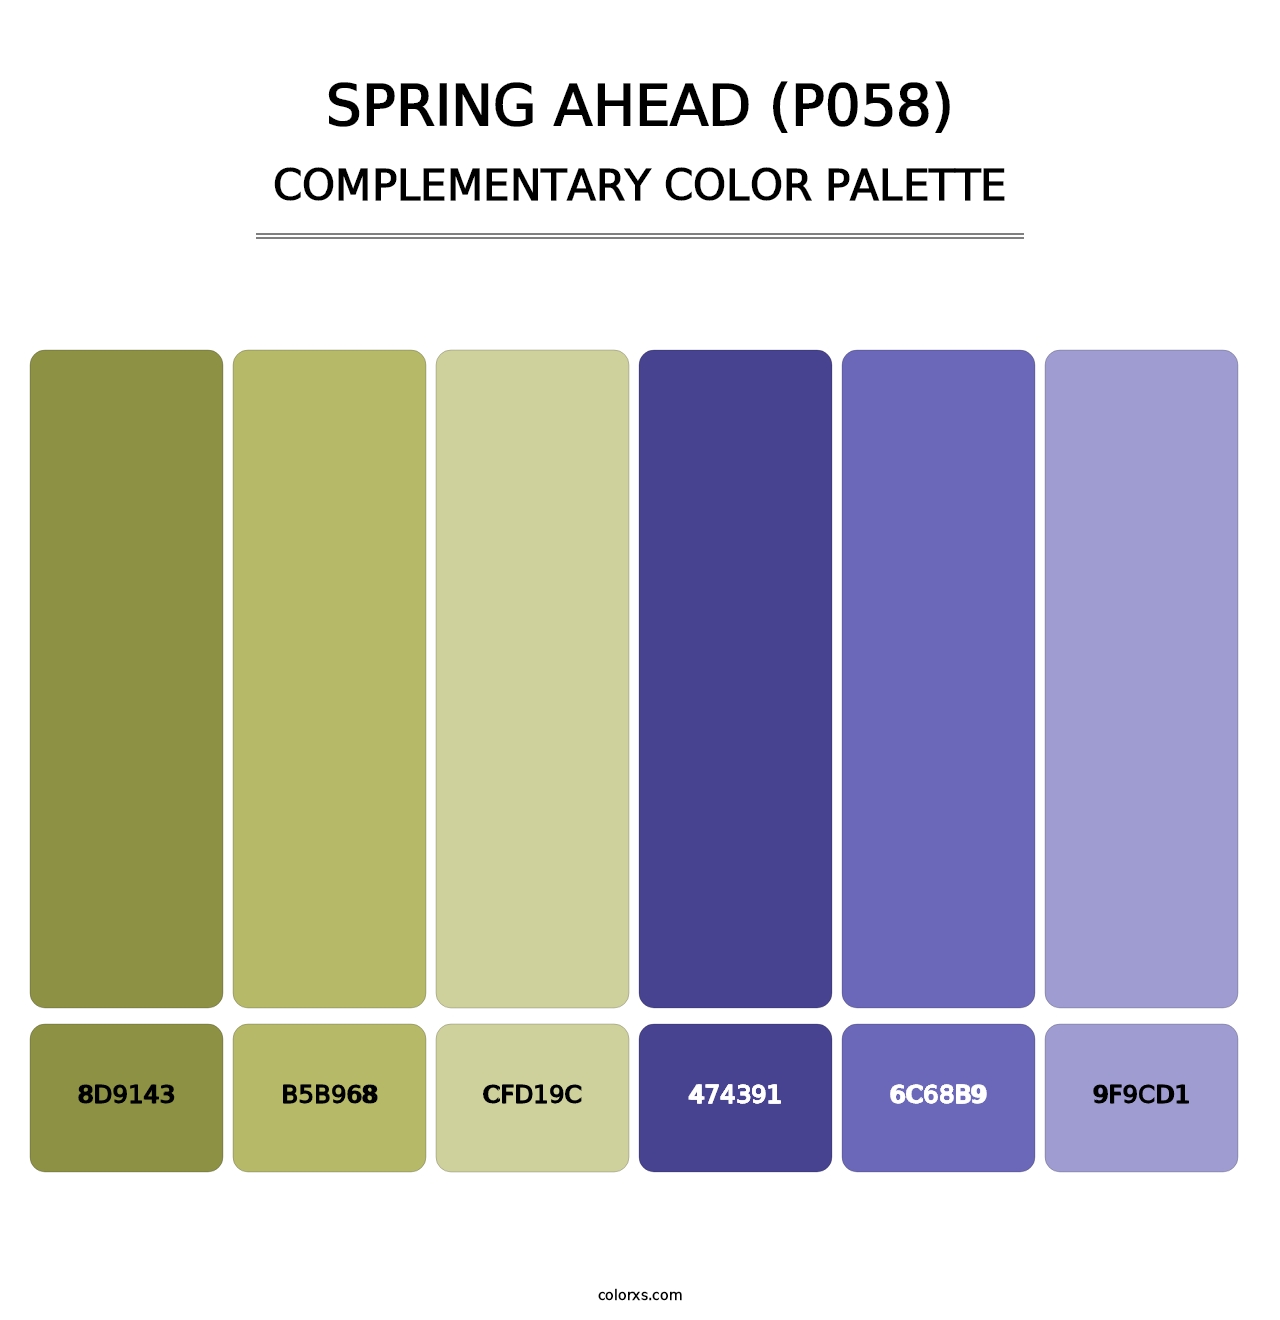 Spring Ahead (P058) - Complementary Color Palette